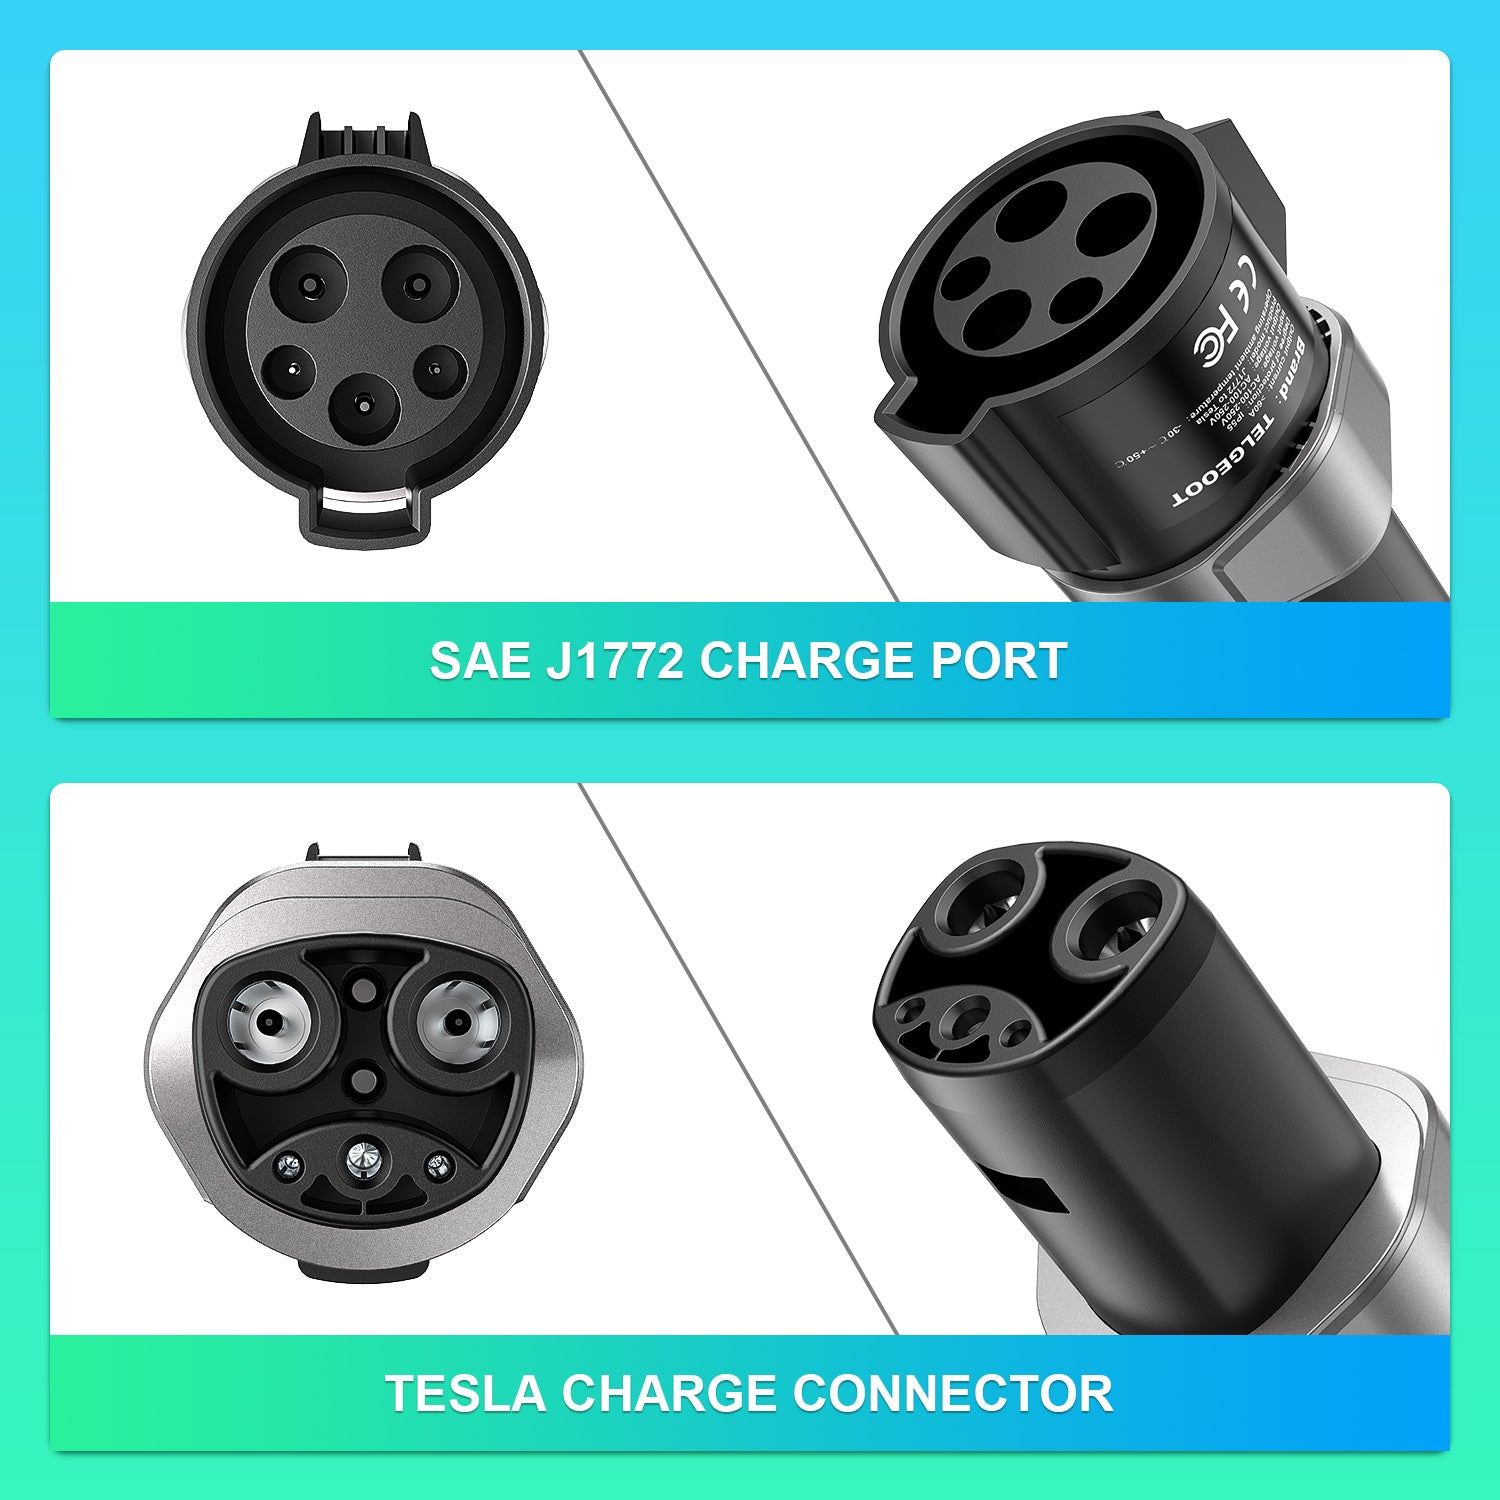 Can other cars use tesla chargers